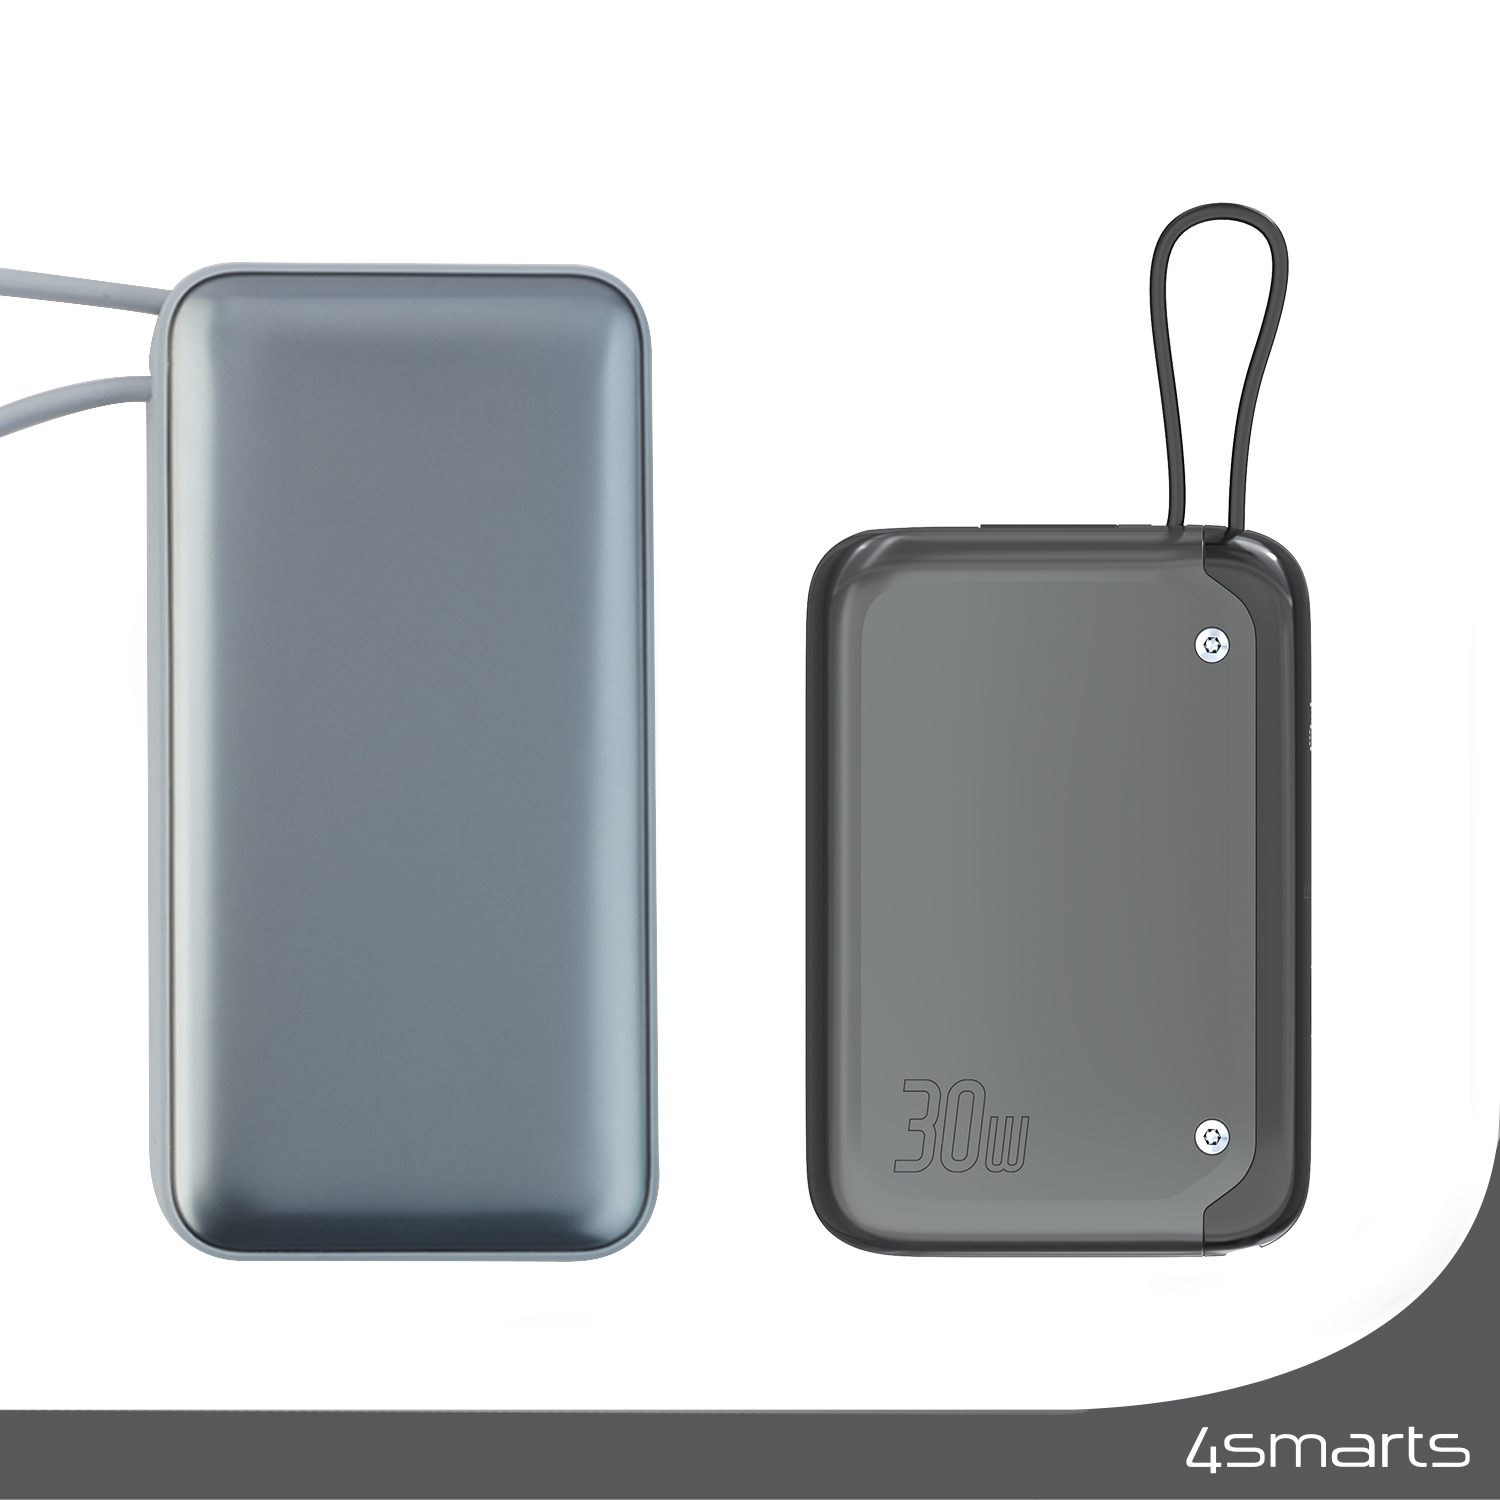 ﻿﻿The handy 4smarts Powerbank Pocket has a capacity of 10,000mAh and allows you to charge your devices quickly at 30W.